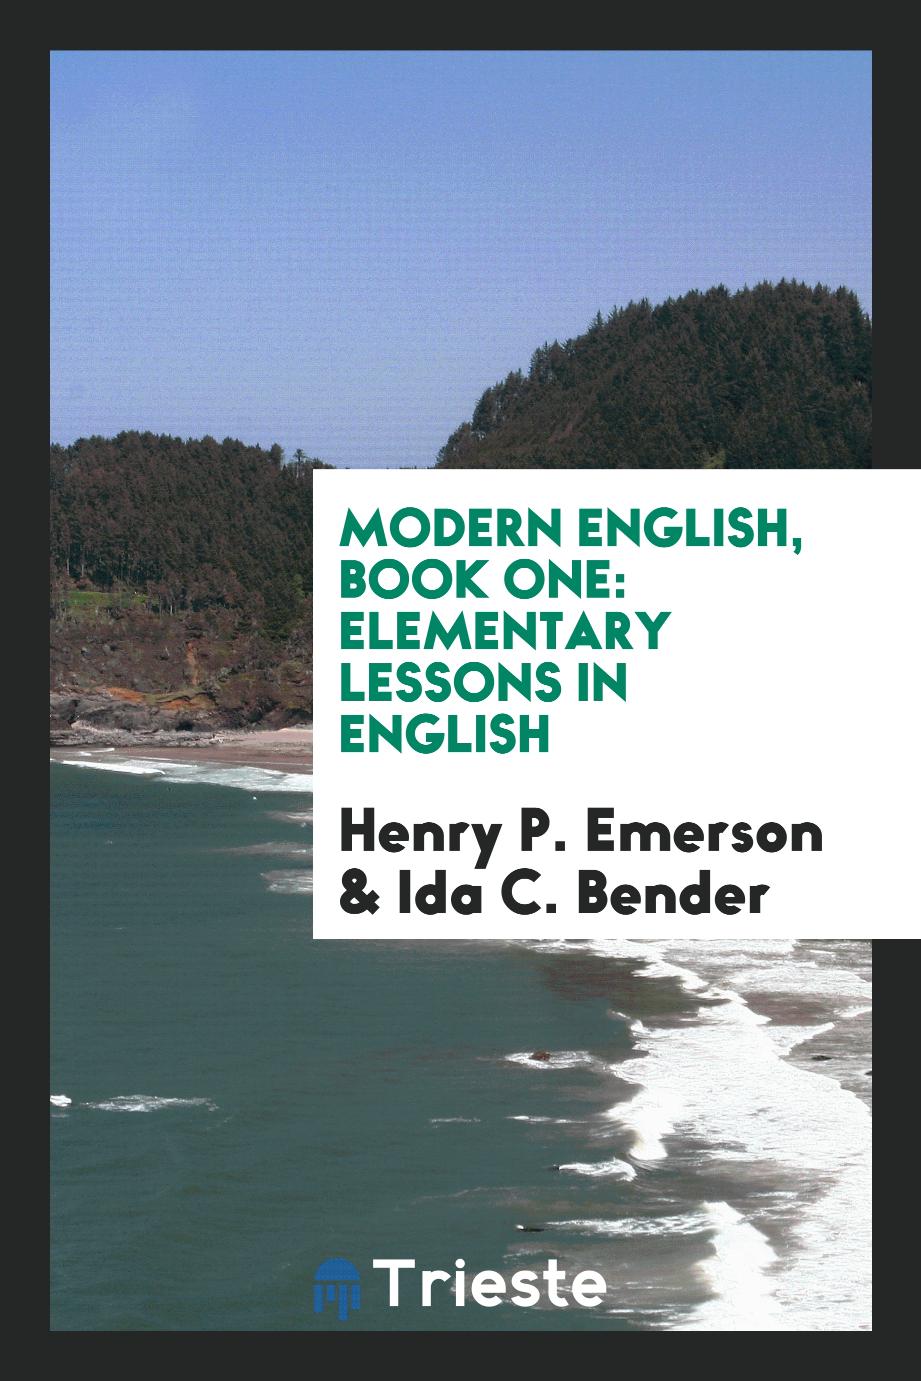 Modern English, Book One: Elementary Lessons in English